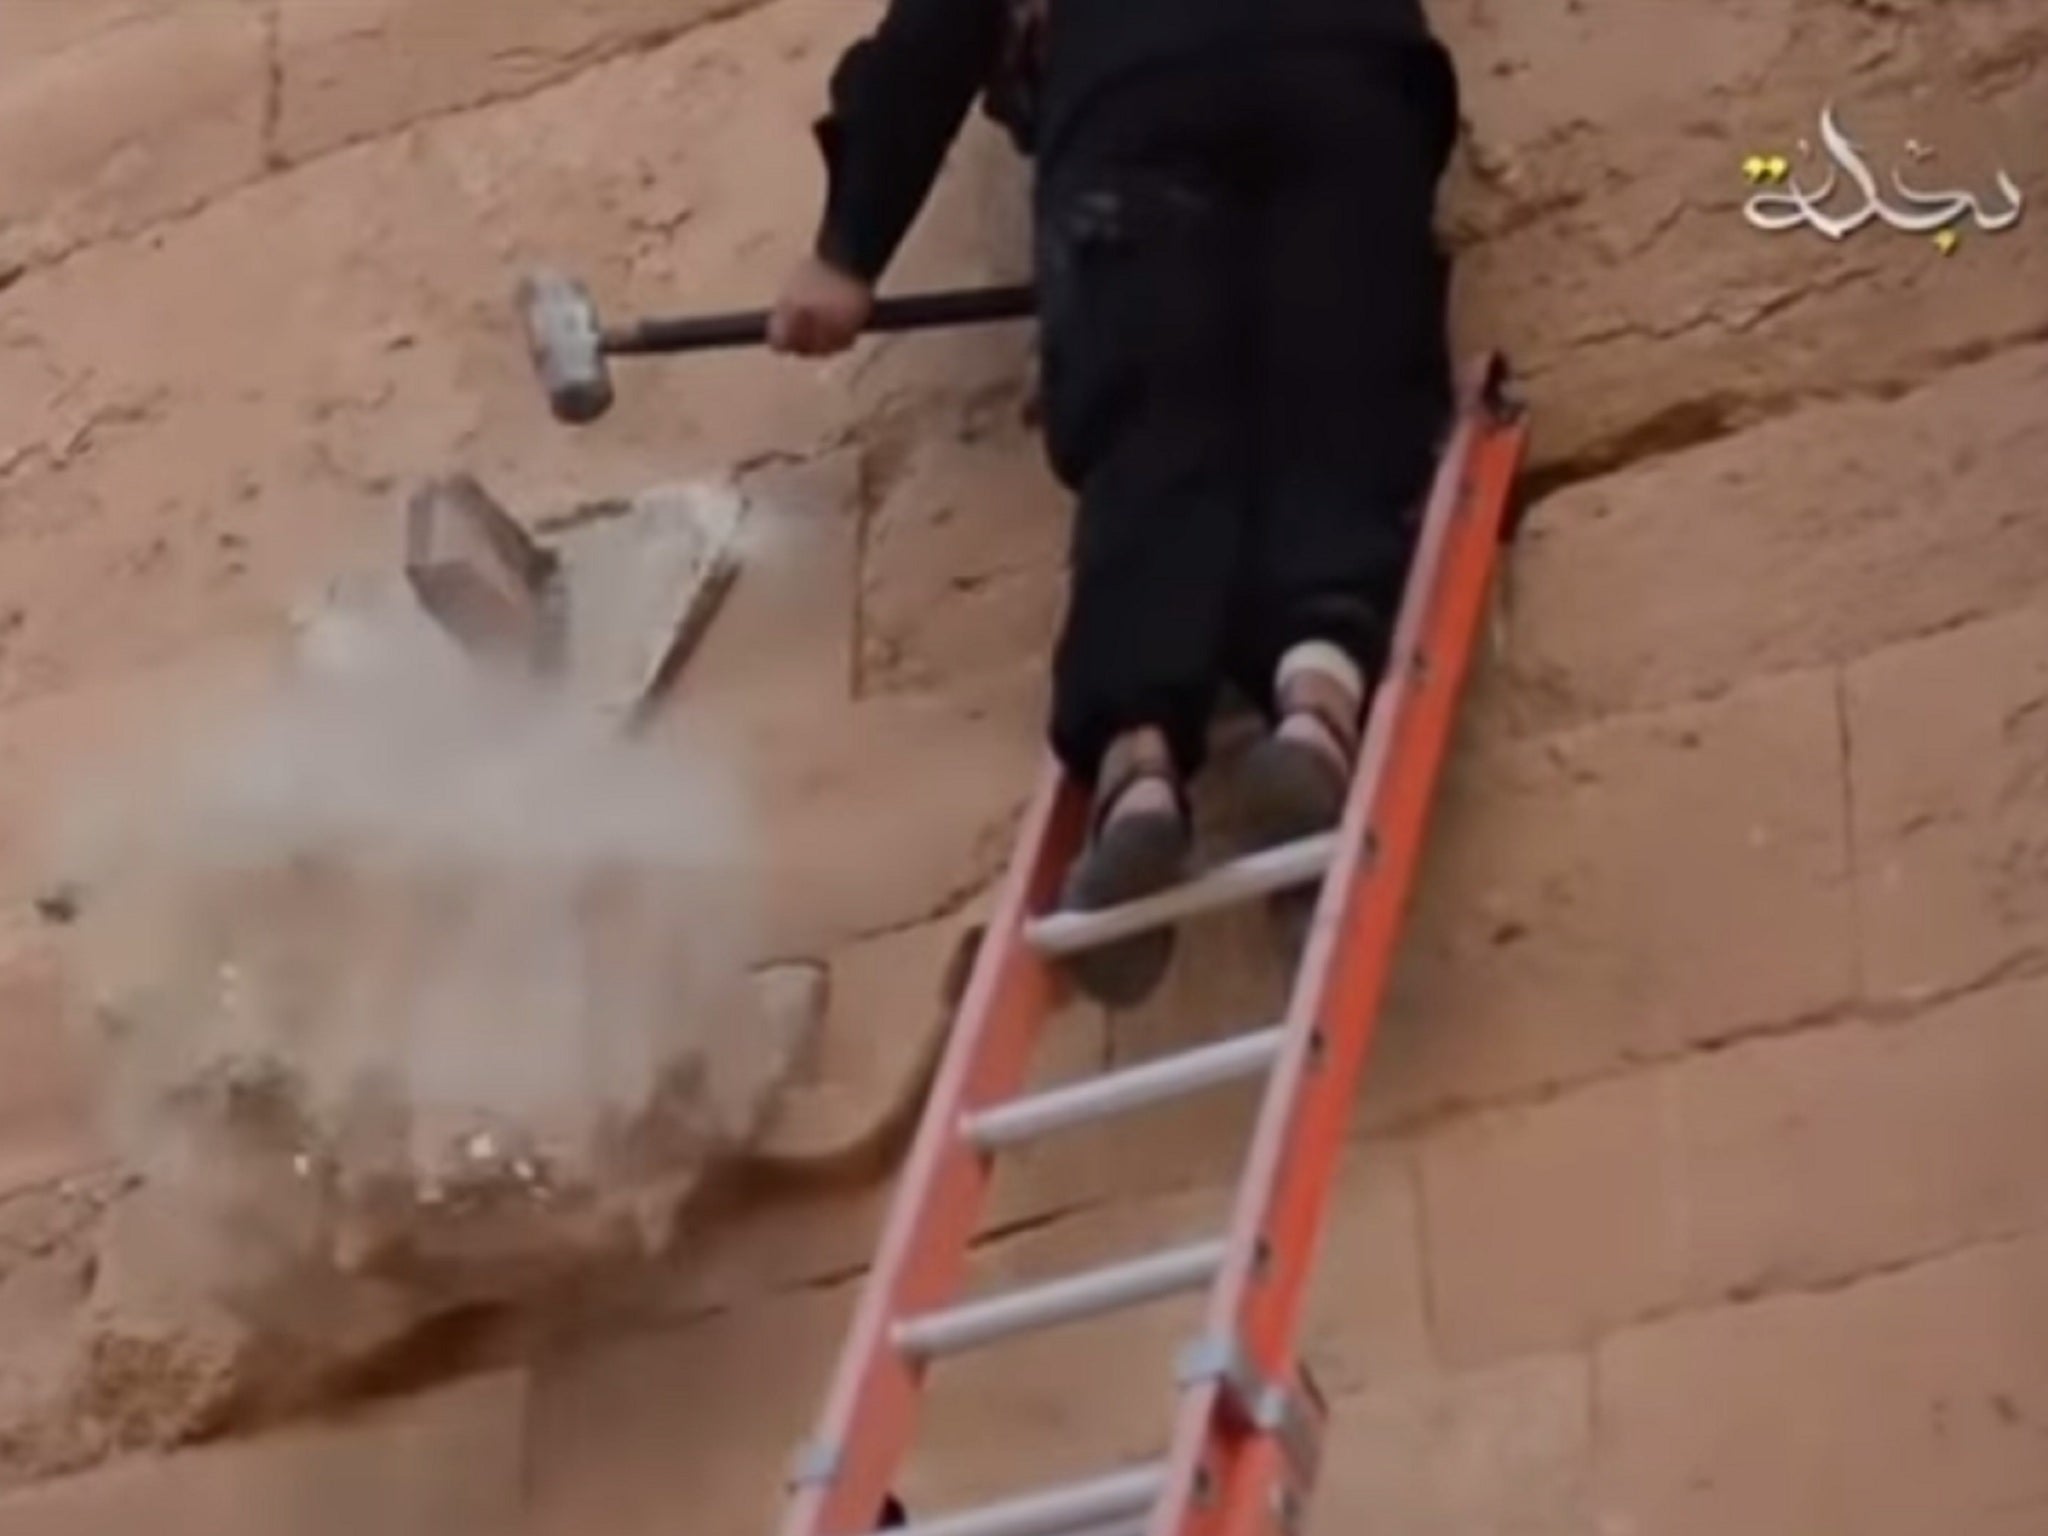 The wall sculpture falls to the floor after being hit by a sledgehammer